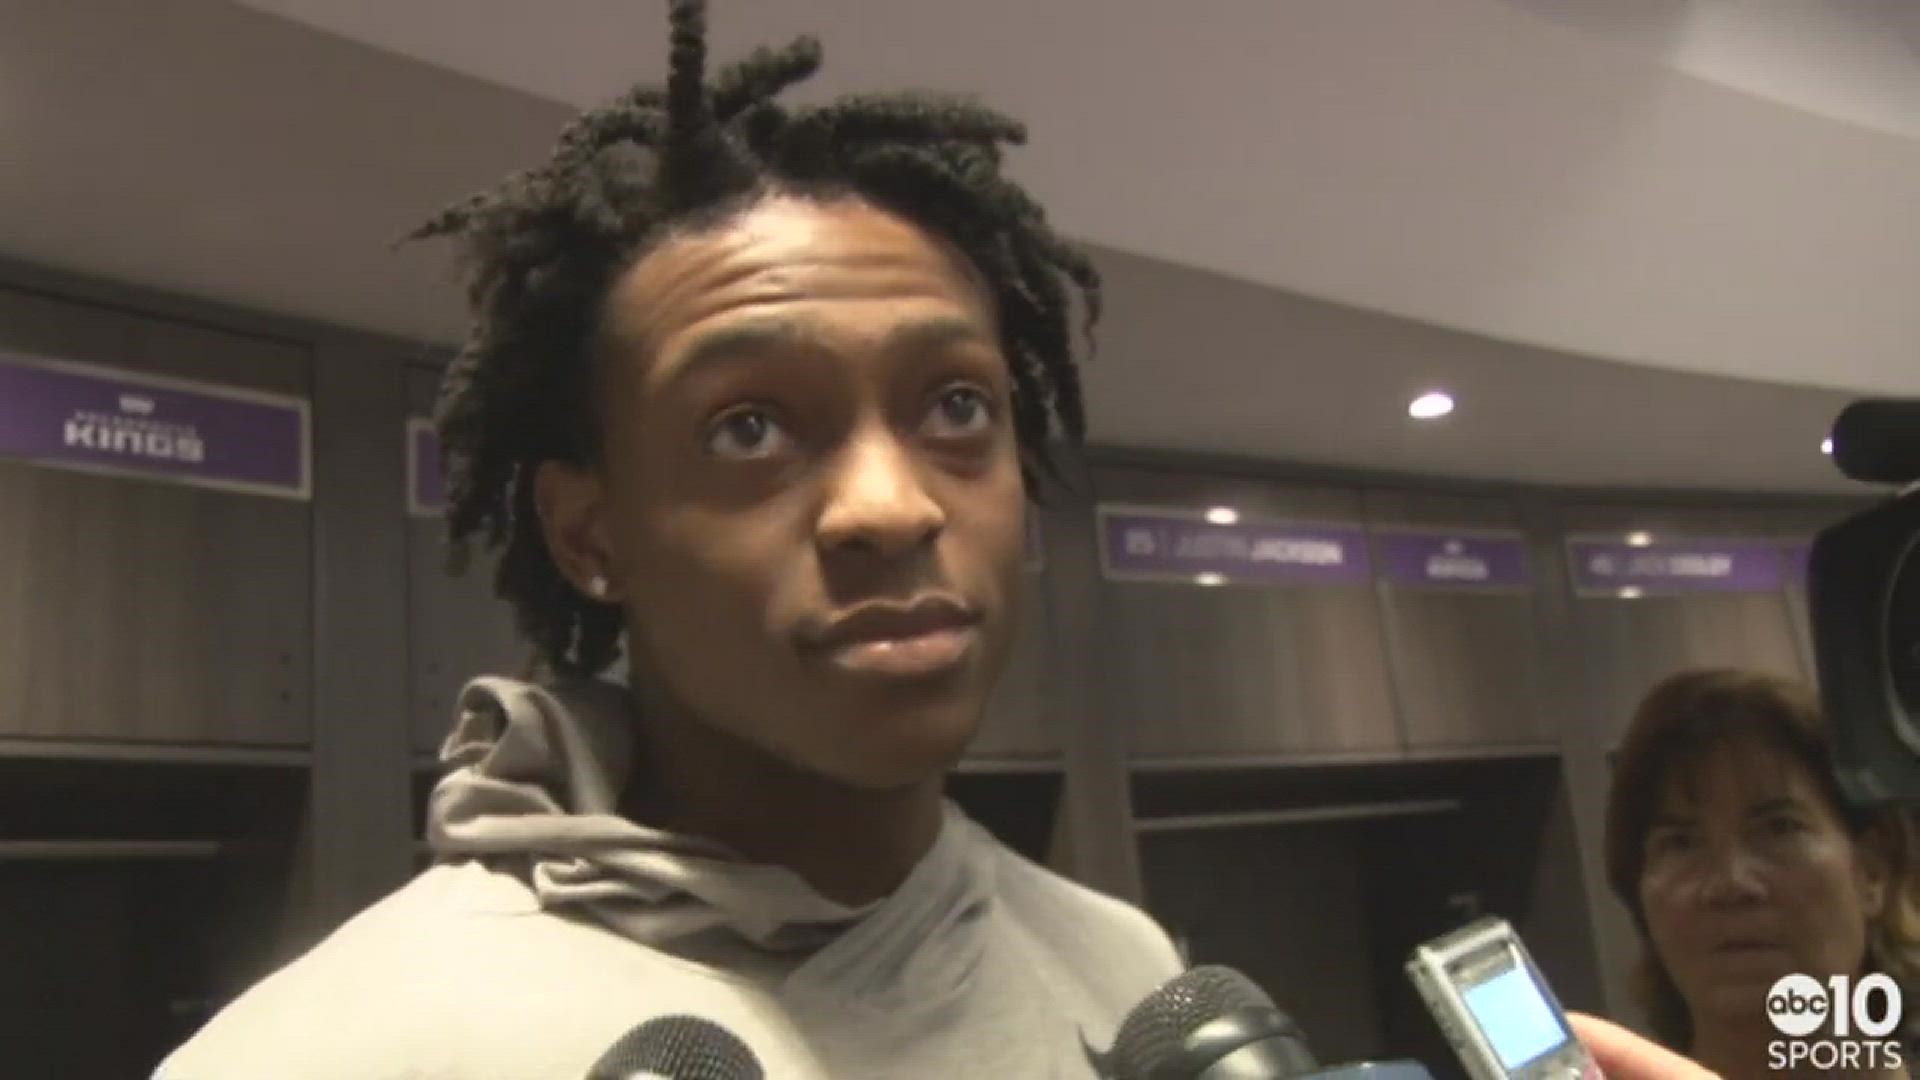 Kings rookie point guard De'Aaron Fox talks about his ankle injury suffered in Monday's win over the Chicago Bulls.